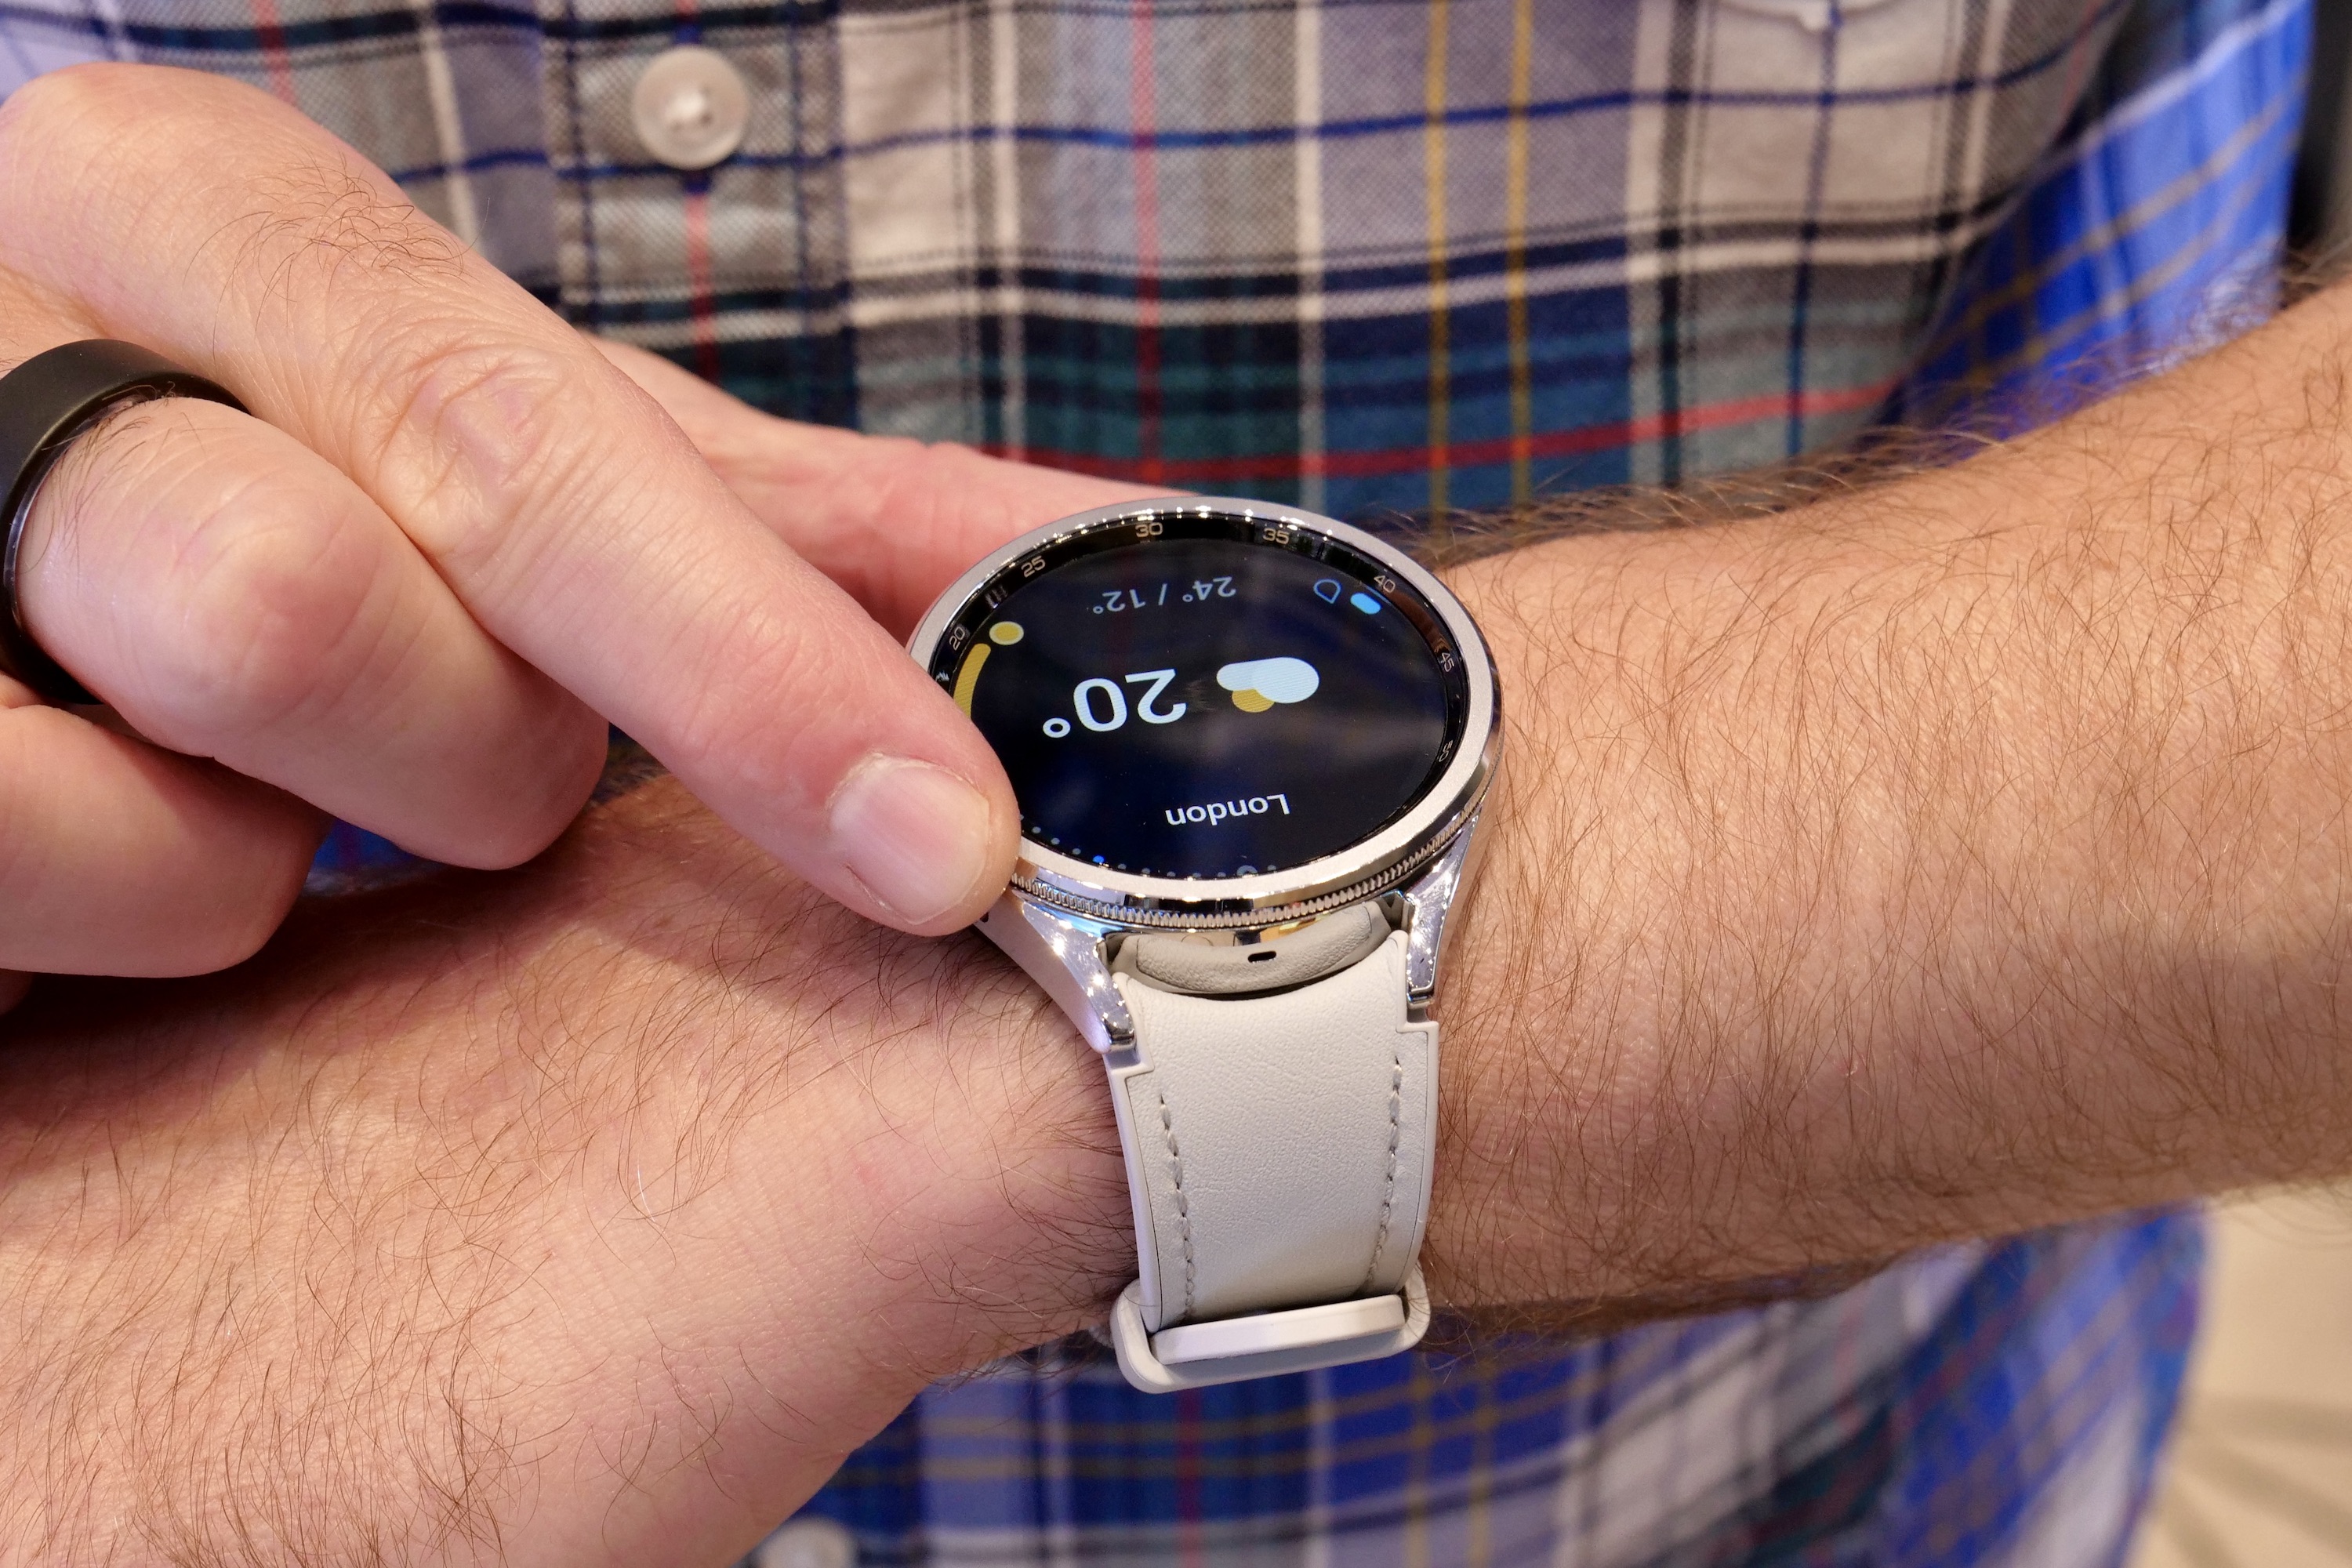 Samsung Galaxy Watch 6 and Watch 6 Classic Review: Notable Upgrades